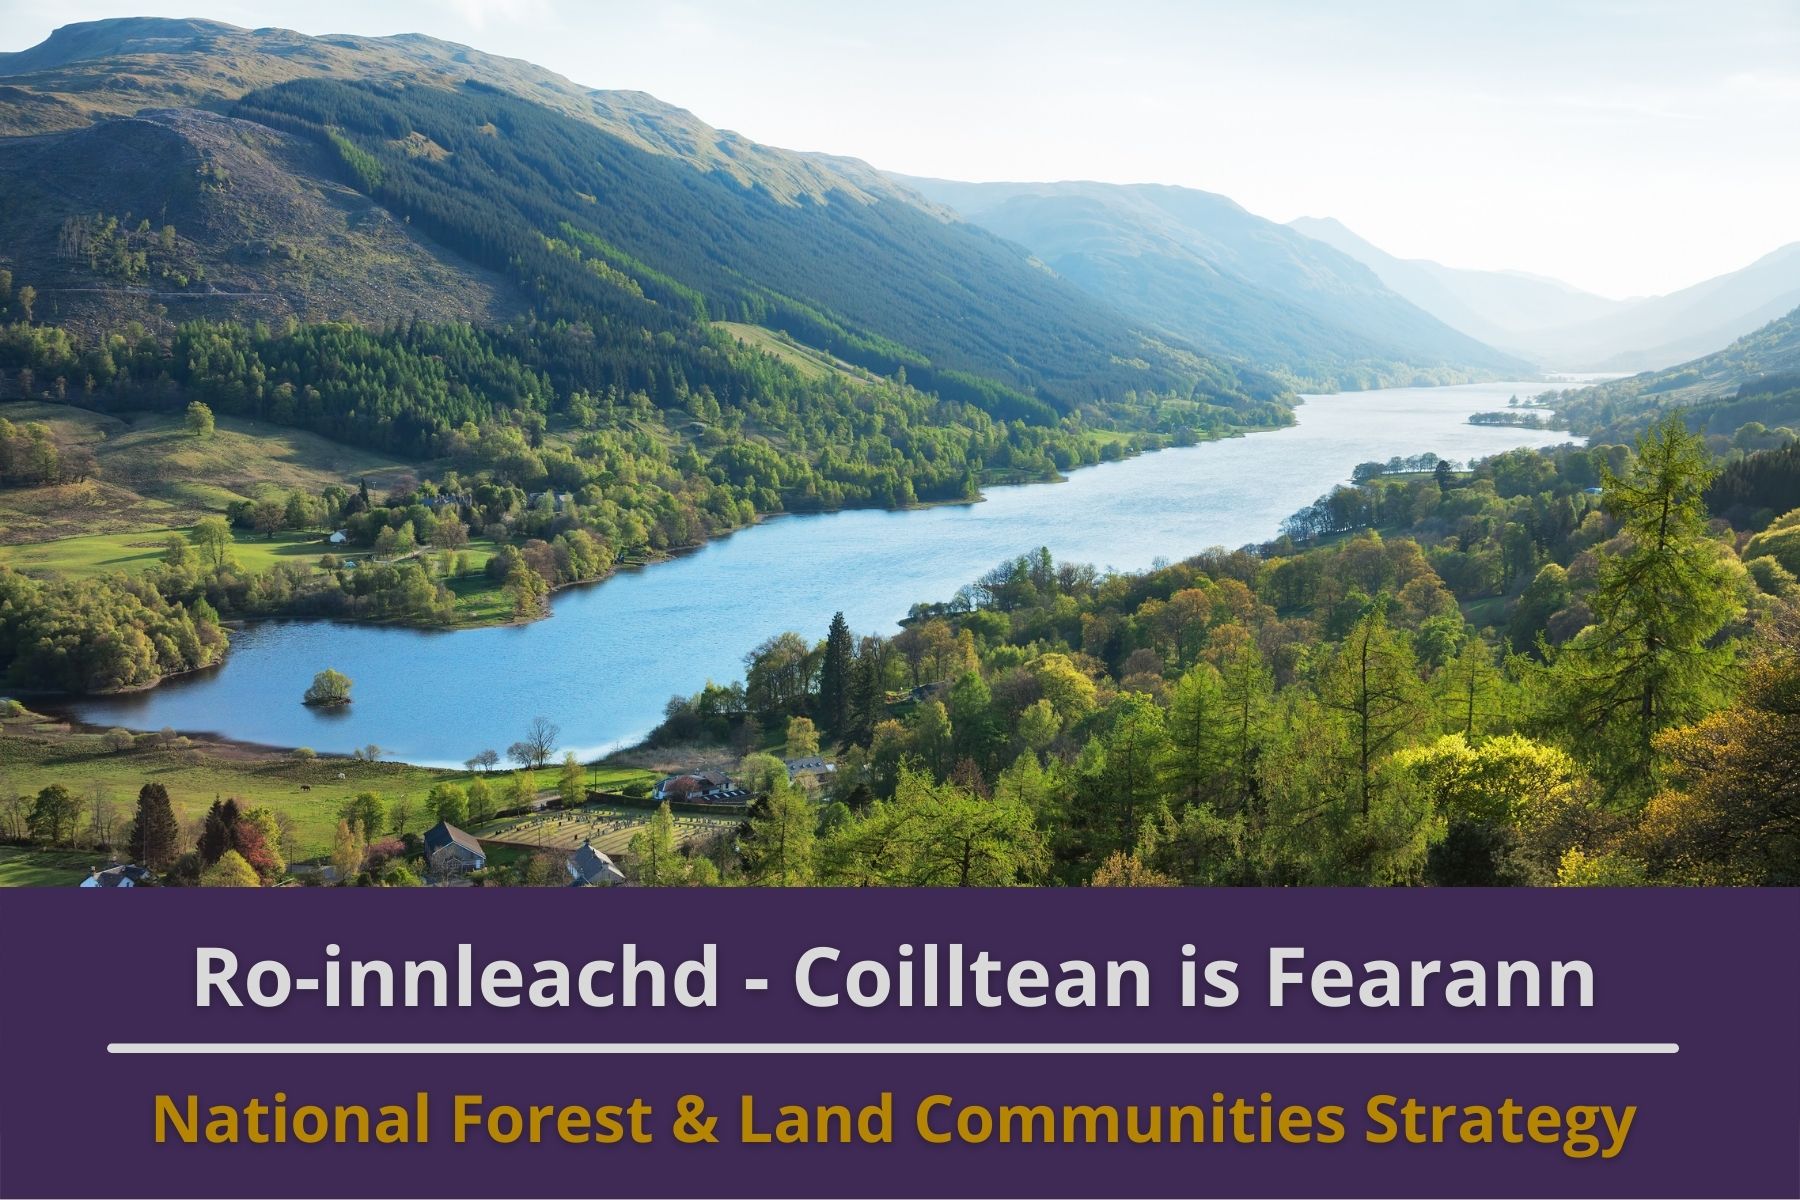 Communities Strategy for Scotland’s National Forest and Land – Draft for Consultation